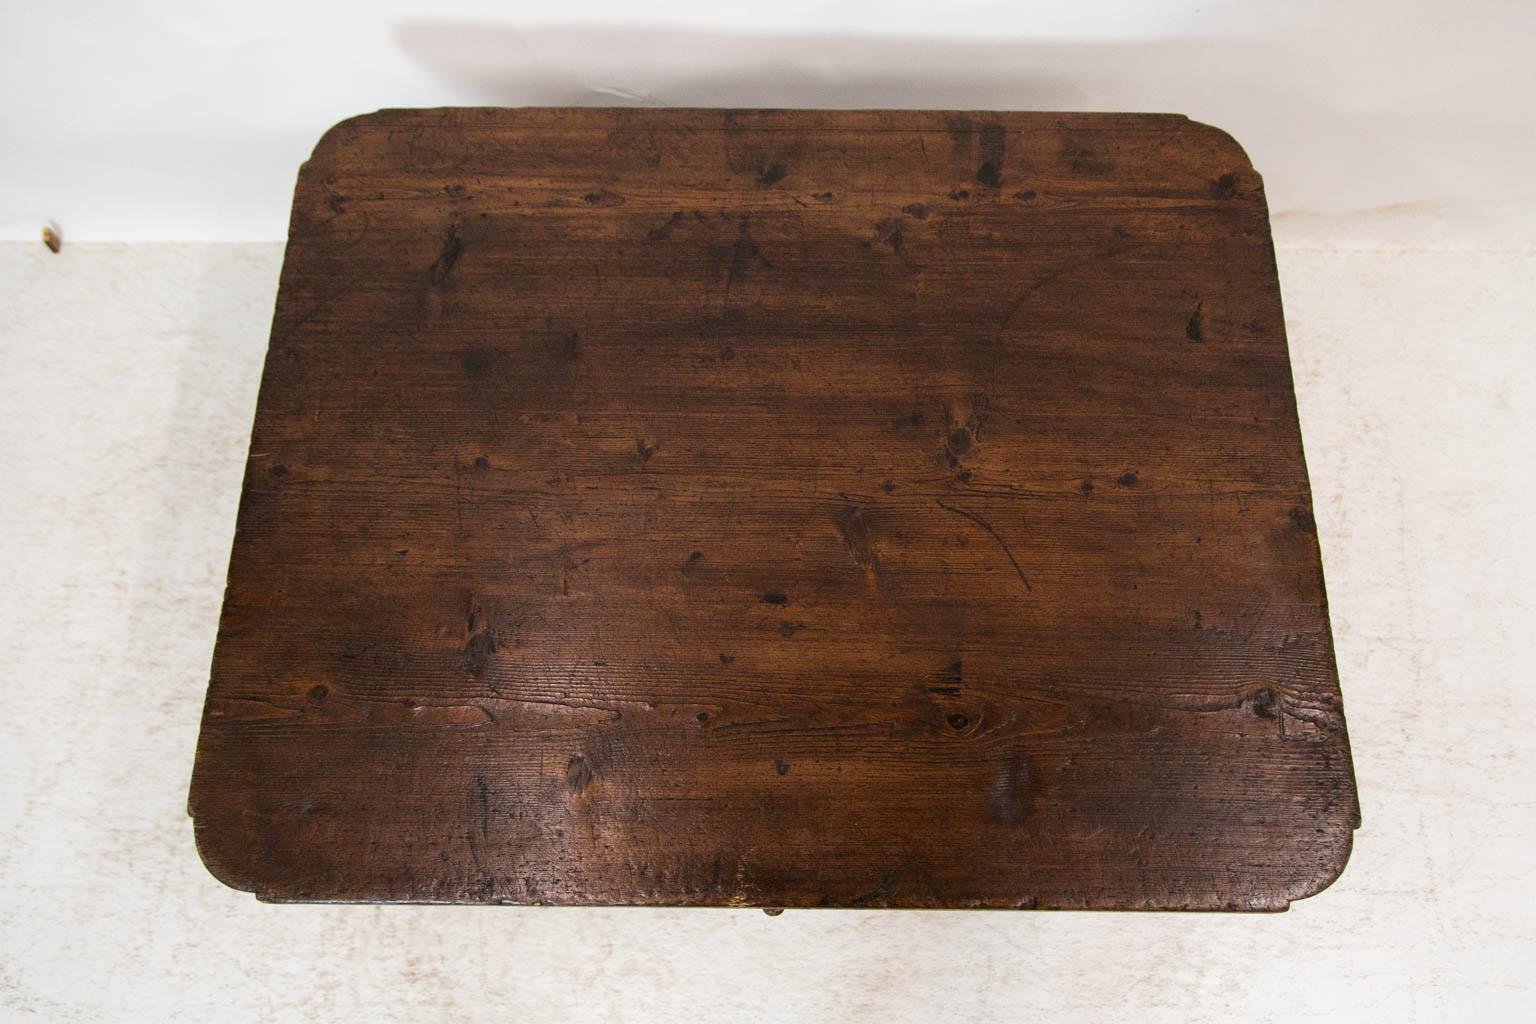 The top of this pine coffee table has ovolo shaped corners and support cleats dovetailed into the underside of the top. The legs have double exposed peg construction and are connected at the bottom by a shaped cross stretcher. The top is not